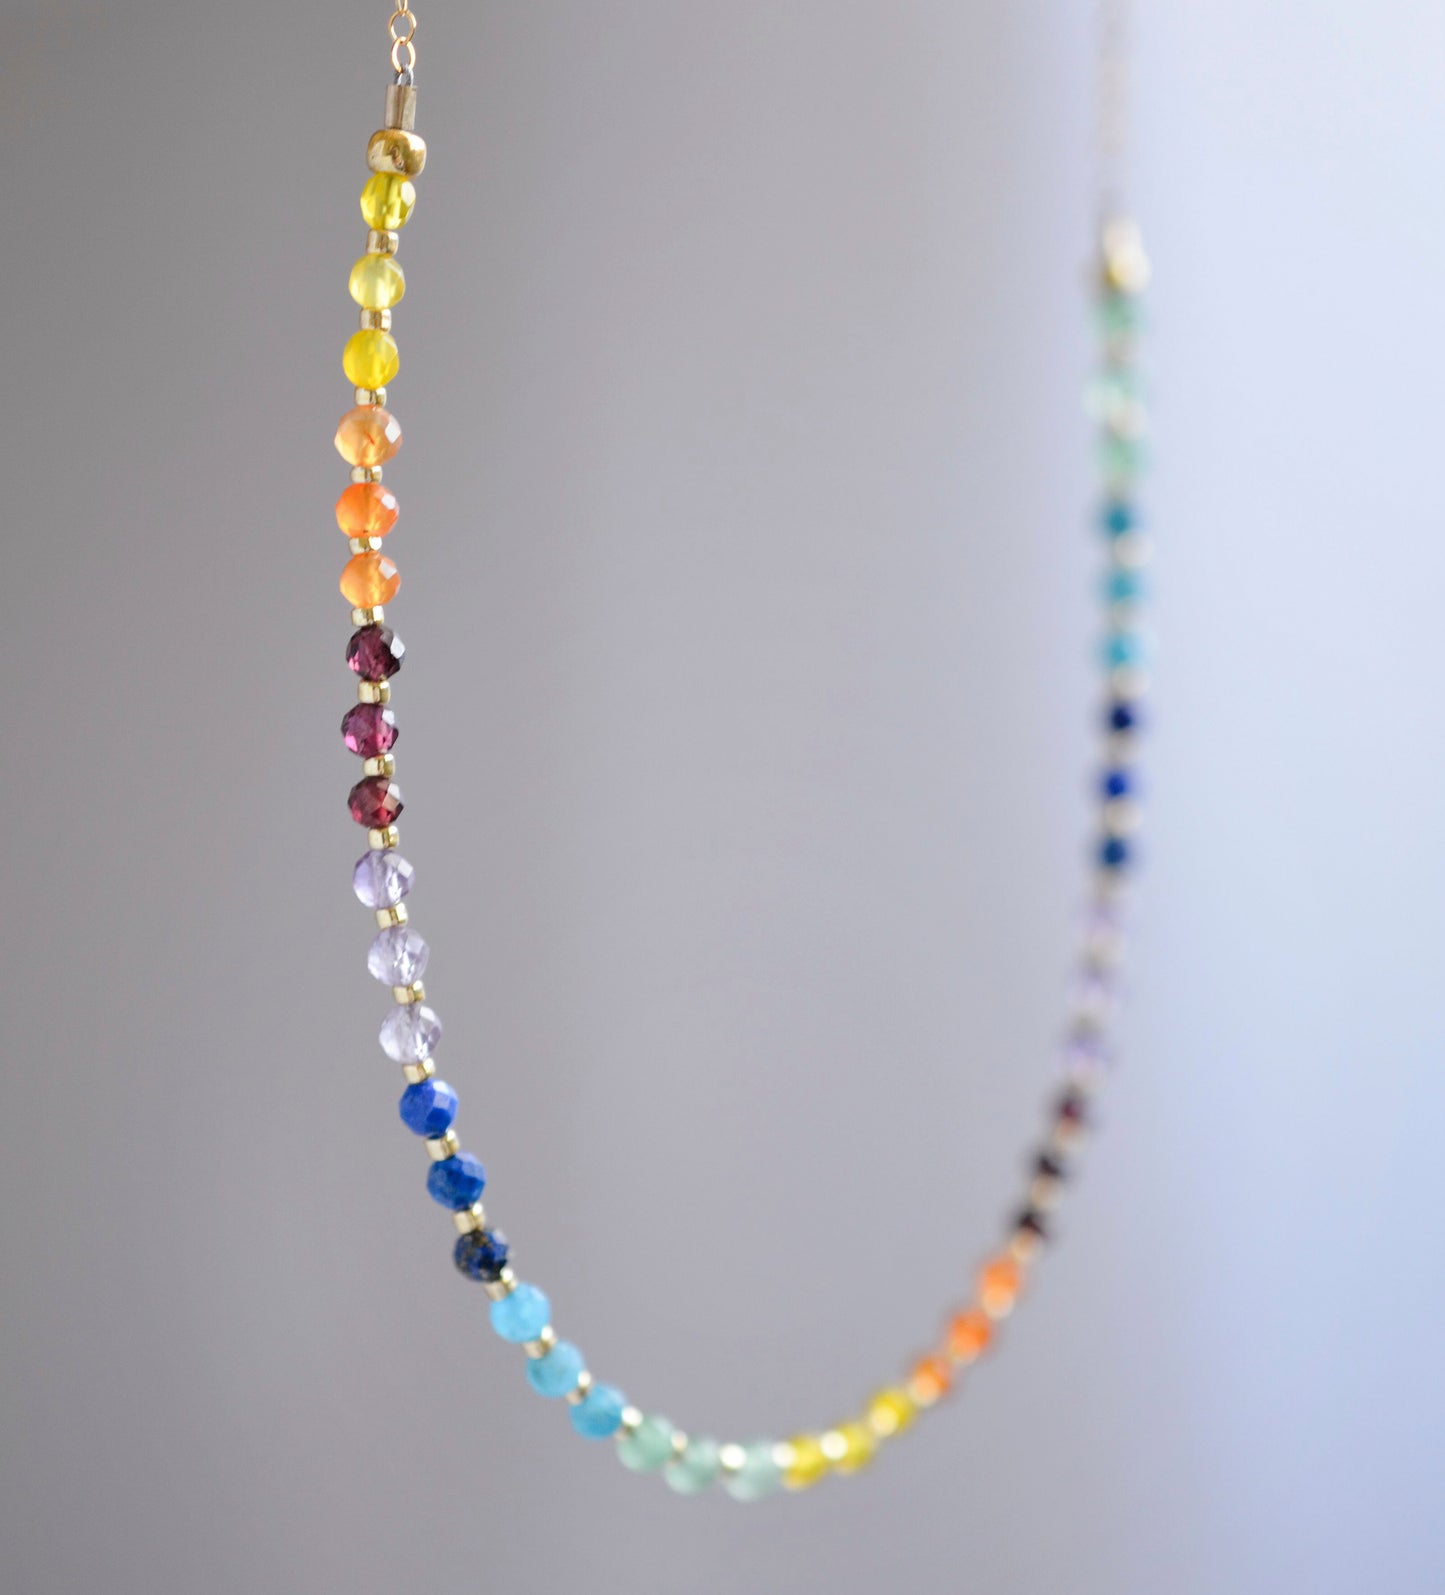 Rainbow chakra gemstone necklace. Crystals are beaded together in this pattern: yellow, orange, red, purple, blue, aqua, green. The gold style is shown. Close up.